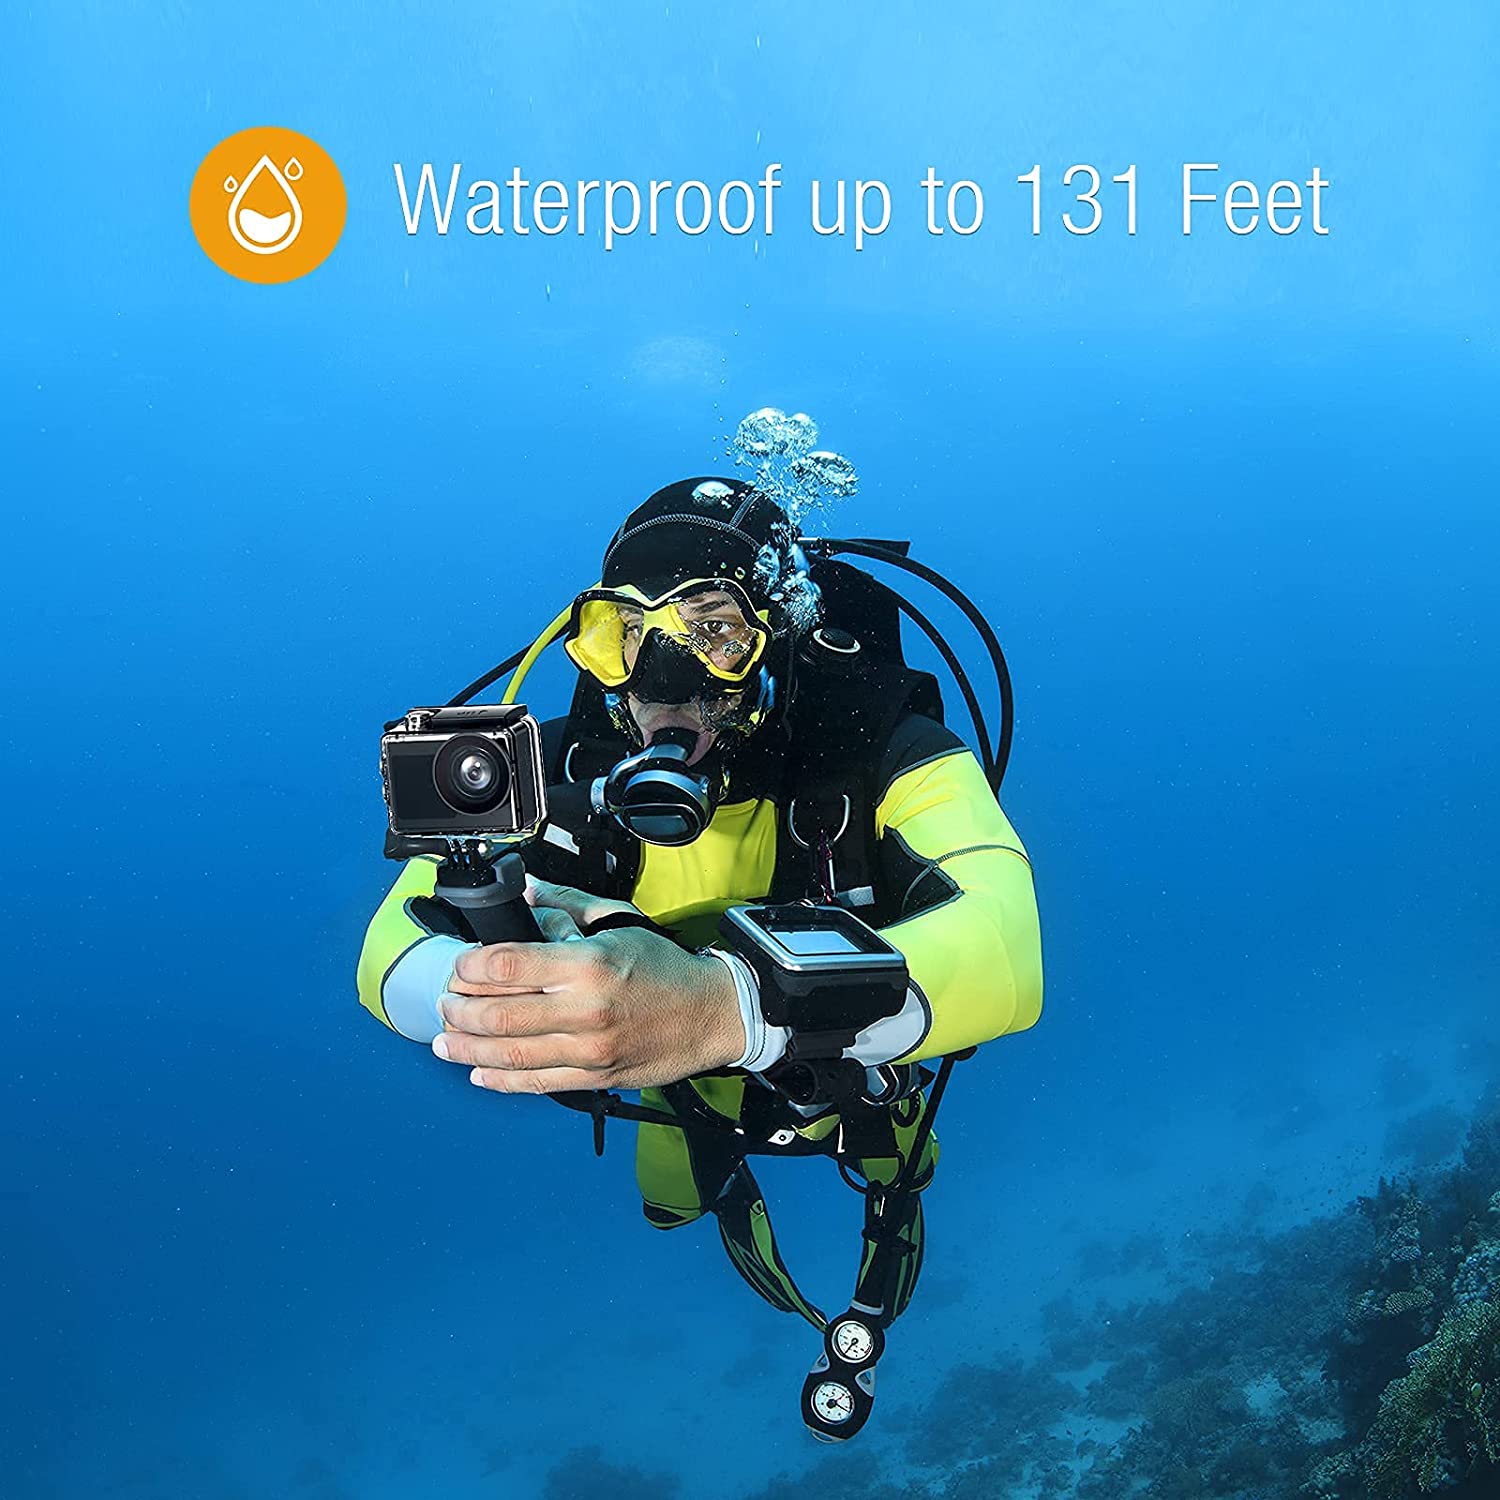 Campark 4K 30FPS Action Camera 20MP Sports Camera 131 Ft Waterproof  Underwater Camera WiFi Vlog Camera EIS 4.0 Zoom Support External Mic Remote  Control 